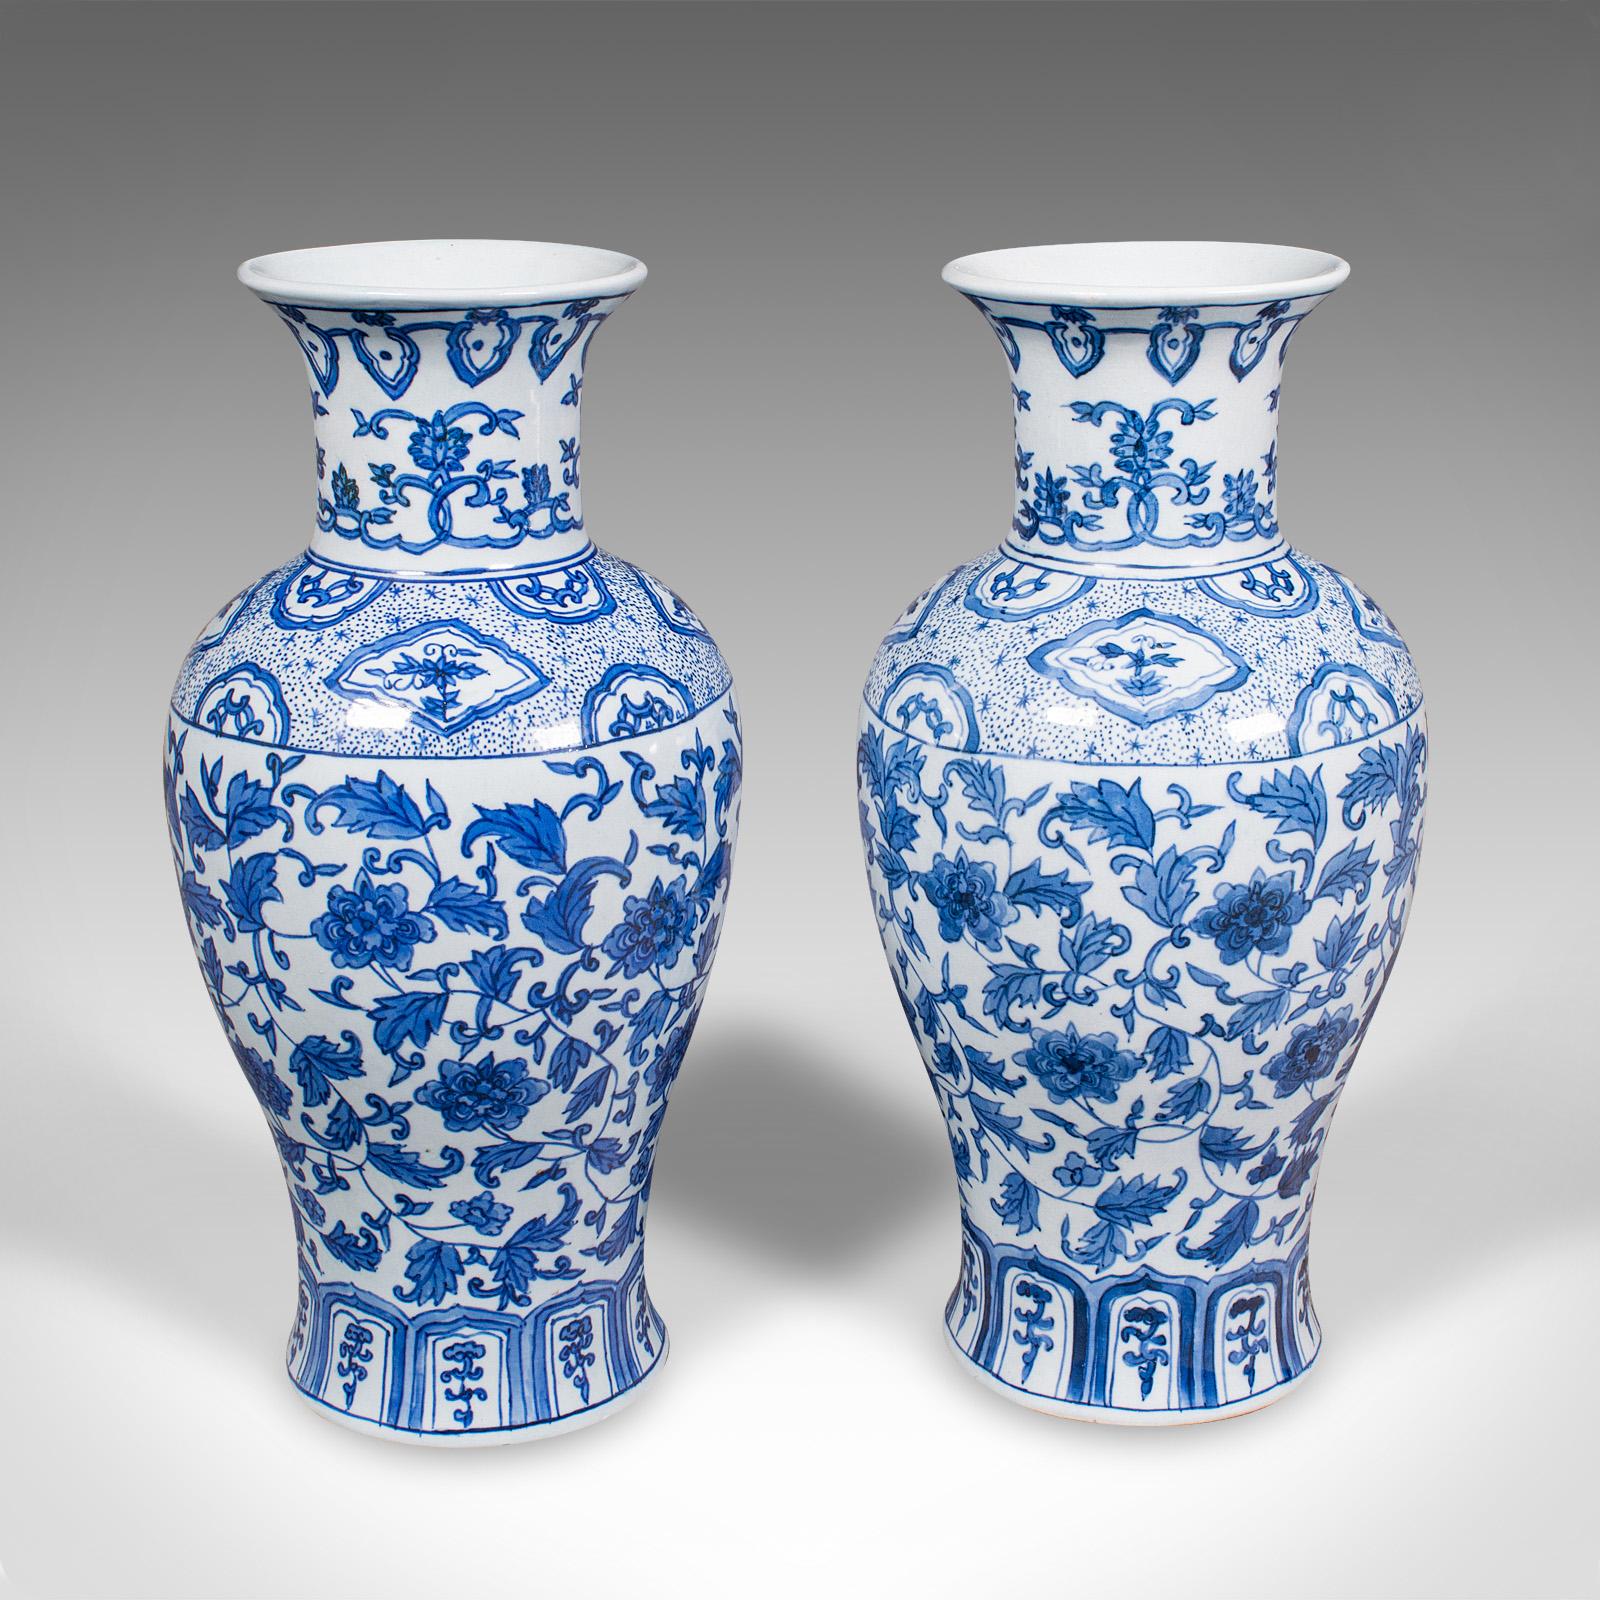 This is a pair of vintage baluster vases. A Chinese, ceramic flower vase with foliate decor, dating to the late Art Deco period, circa 1940.

Delightfully decorative vases, ideal for a side table or mantlepiece display
Displaying a desirable aged